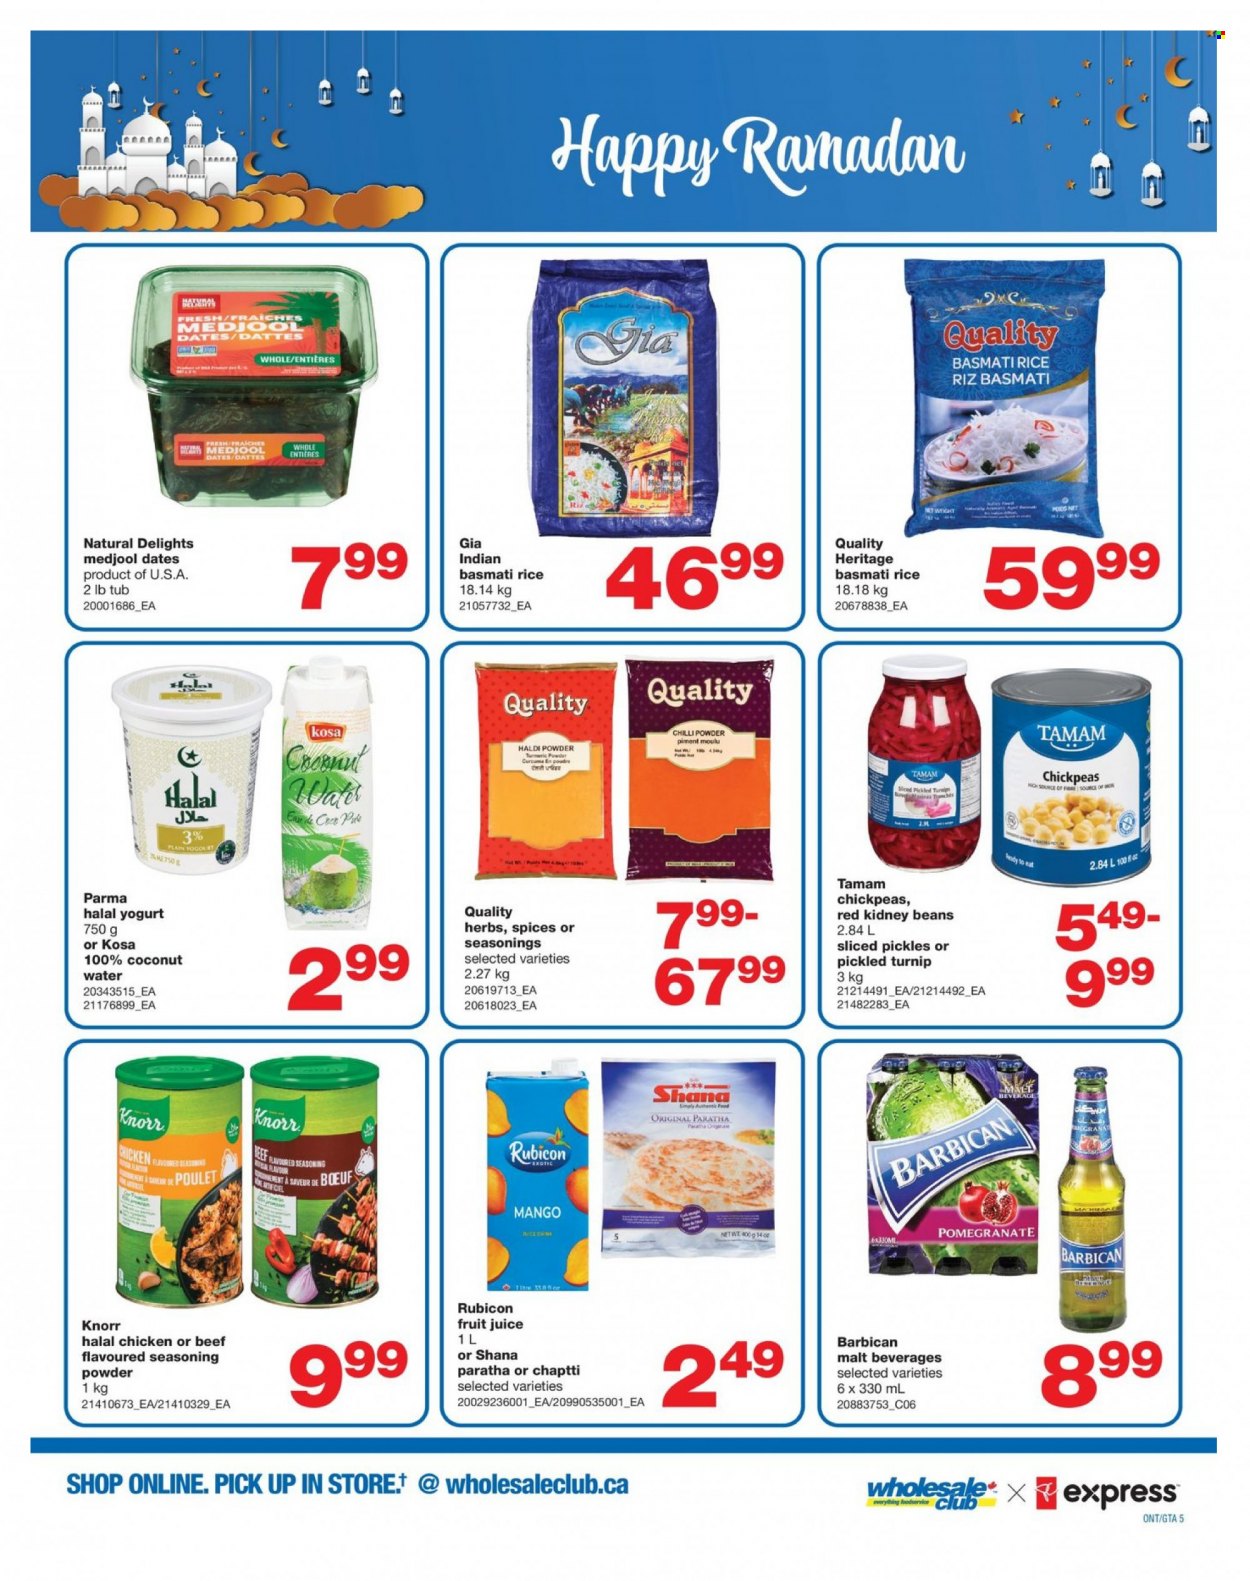 thumbnail - Wholesale Club Flyer - March 16, 2023 - April 05, 2023 - Sales products - beans, pomegranate, yoghurt, malt, kidney beans, pickles, basmati rice, rice, chickpeas, turmeric, spice, herbs, chilli powder, dried dates, juice, fruit juice, coconut water, water, Knorr. Page 5.